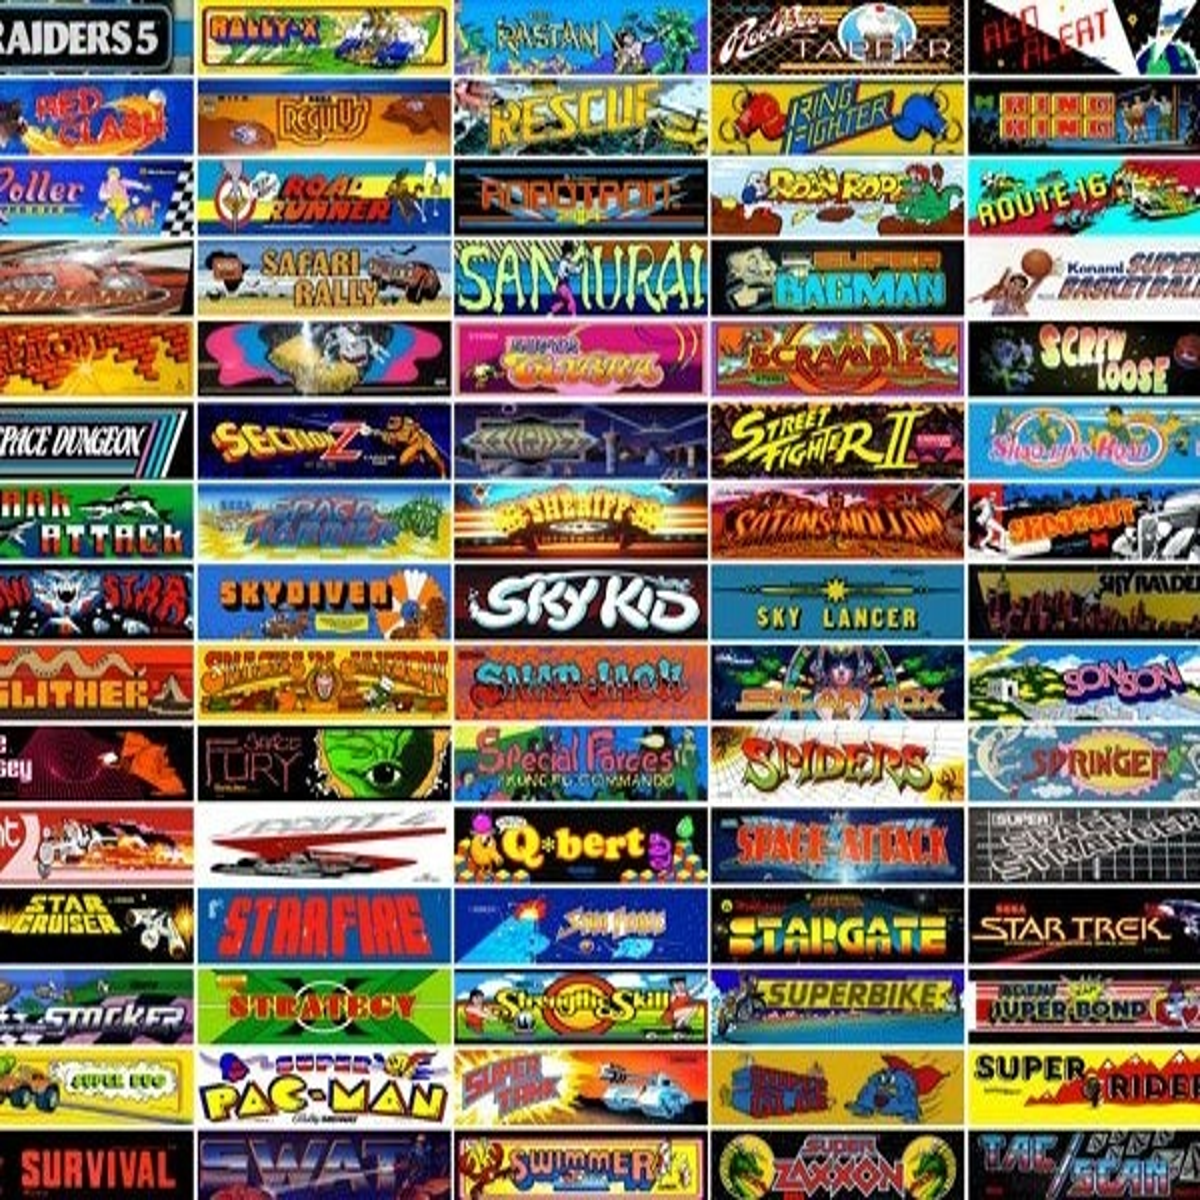  Play retro games online in your browser